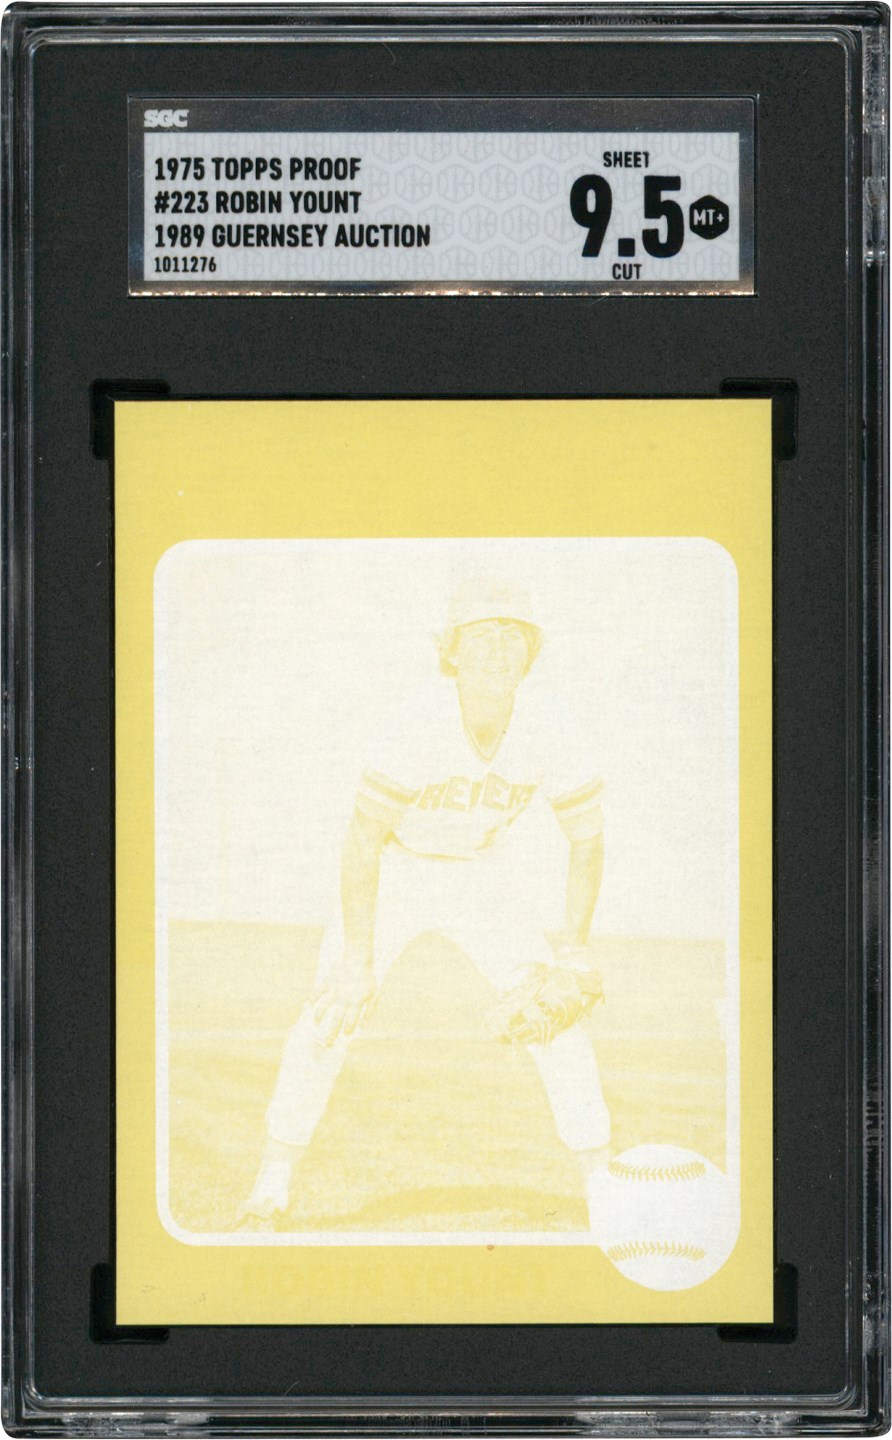 1975 Topps Yellow Proof #223 Robin Yount Rookie Card "1/1" SGC MINT+ 9.5 (ex-1989 Guernsey Auction)